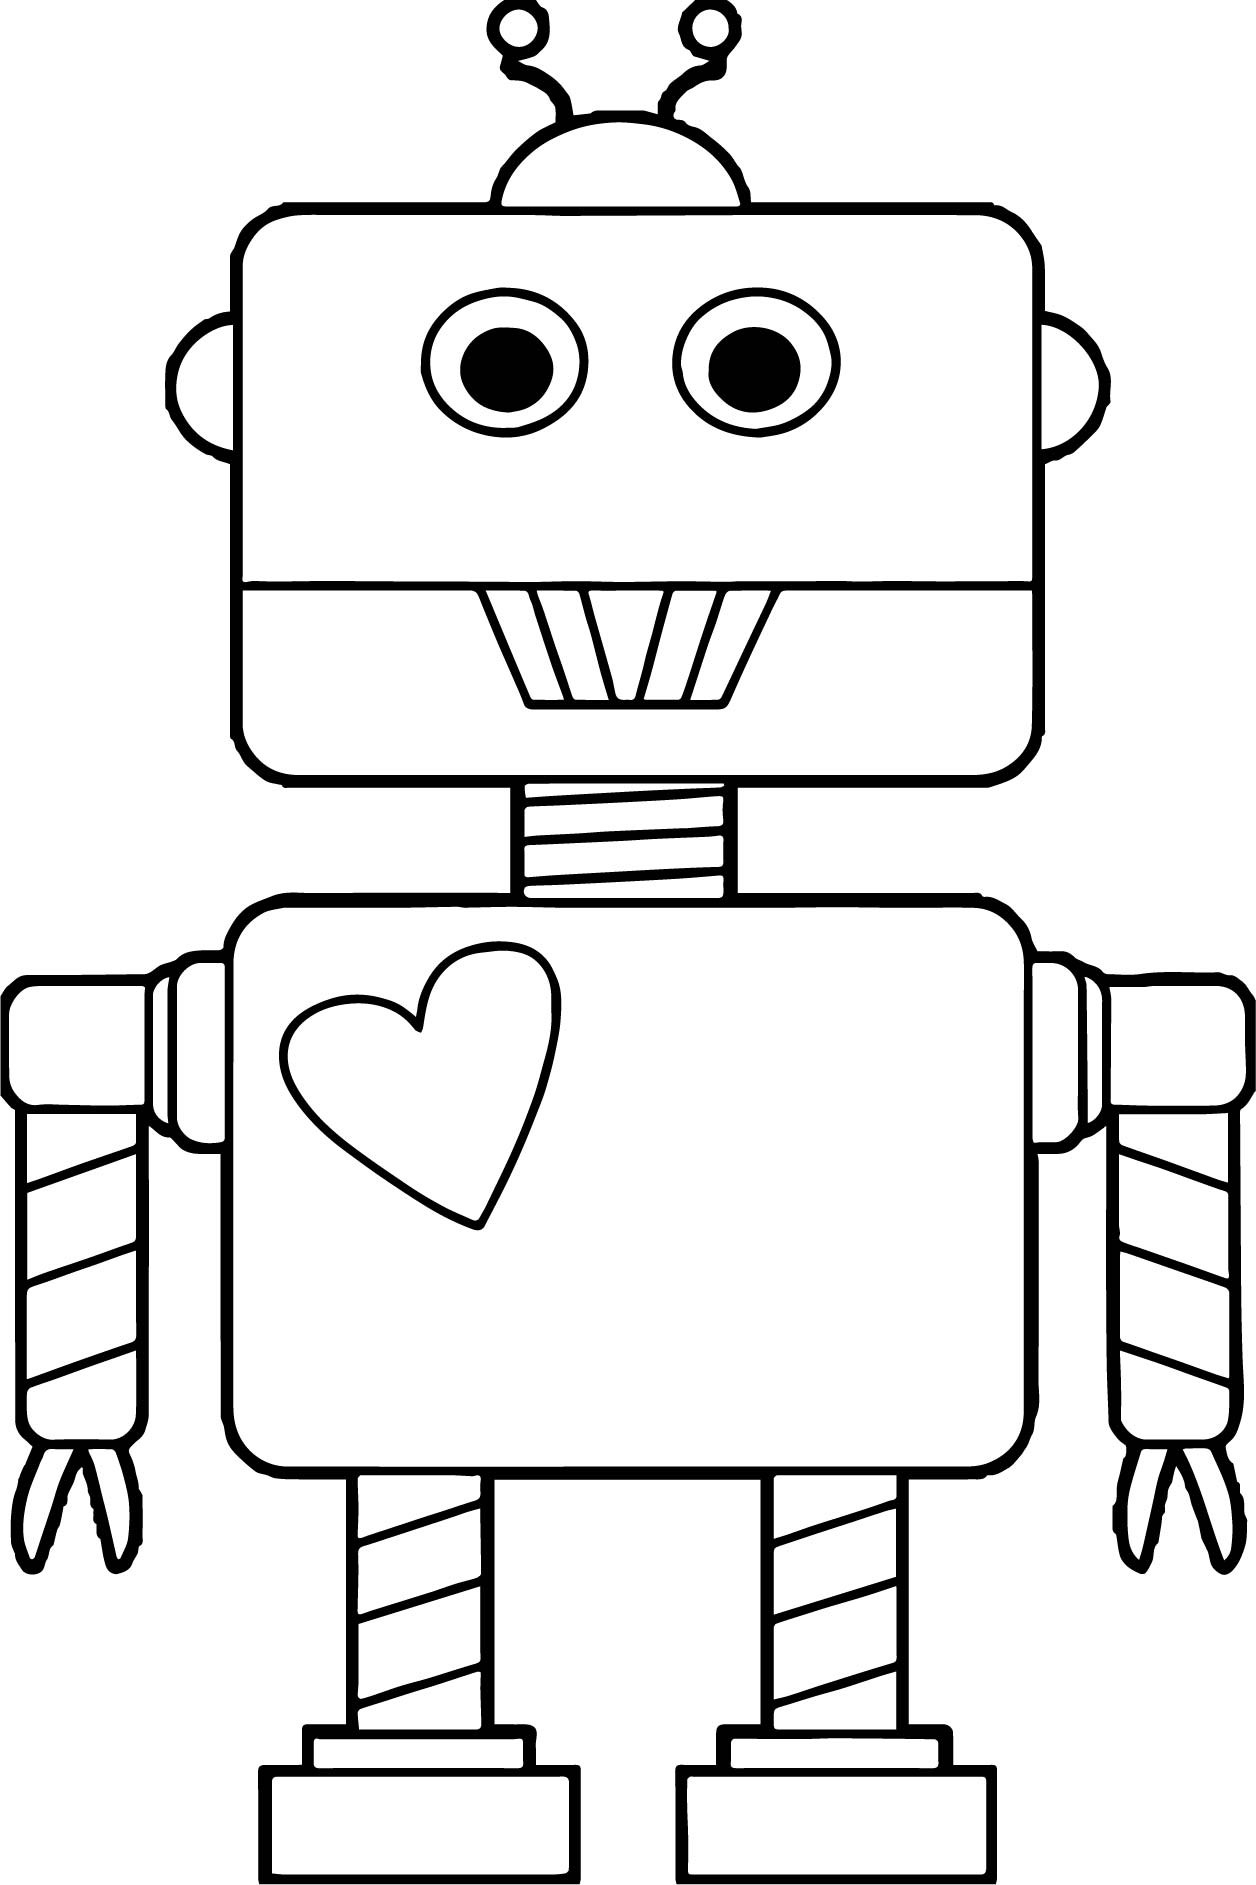 Lego Robot Coloring Page - Free Printable Coloring Pages for Kids